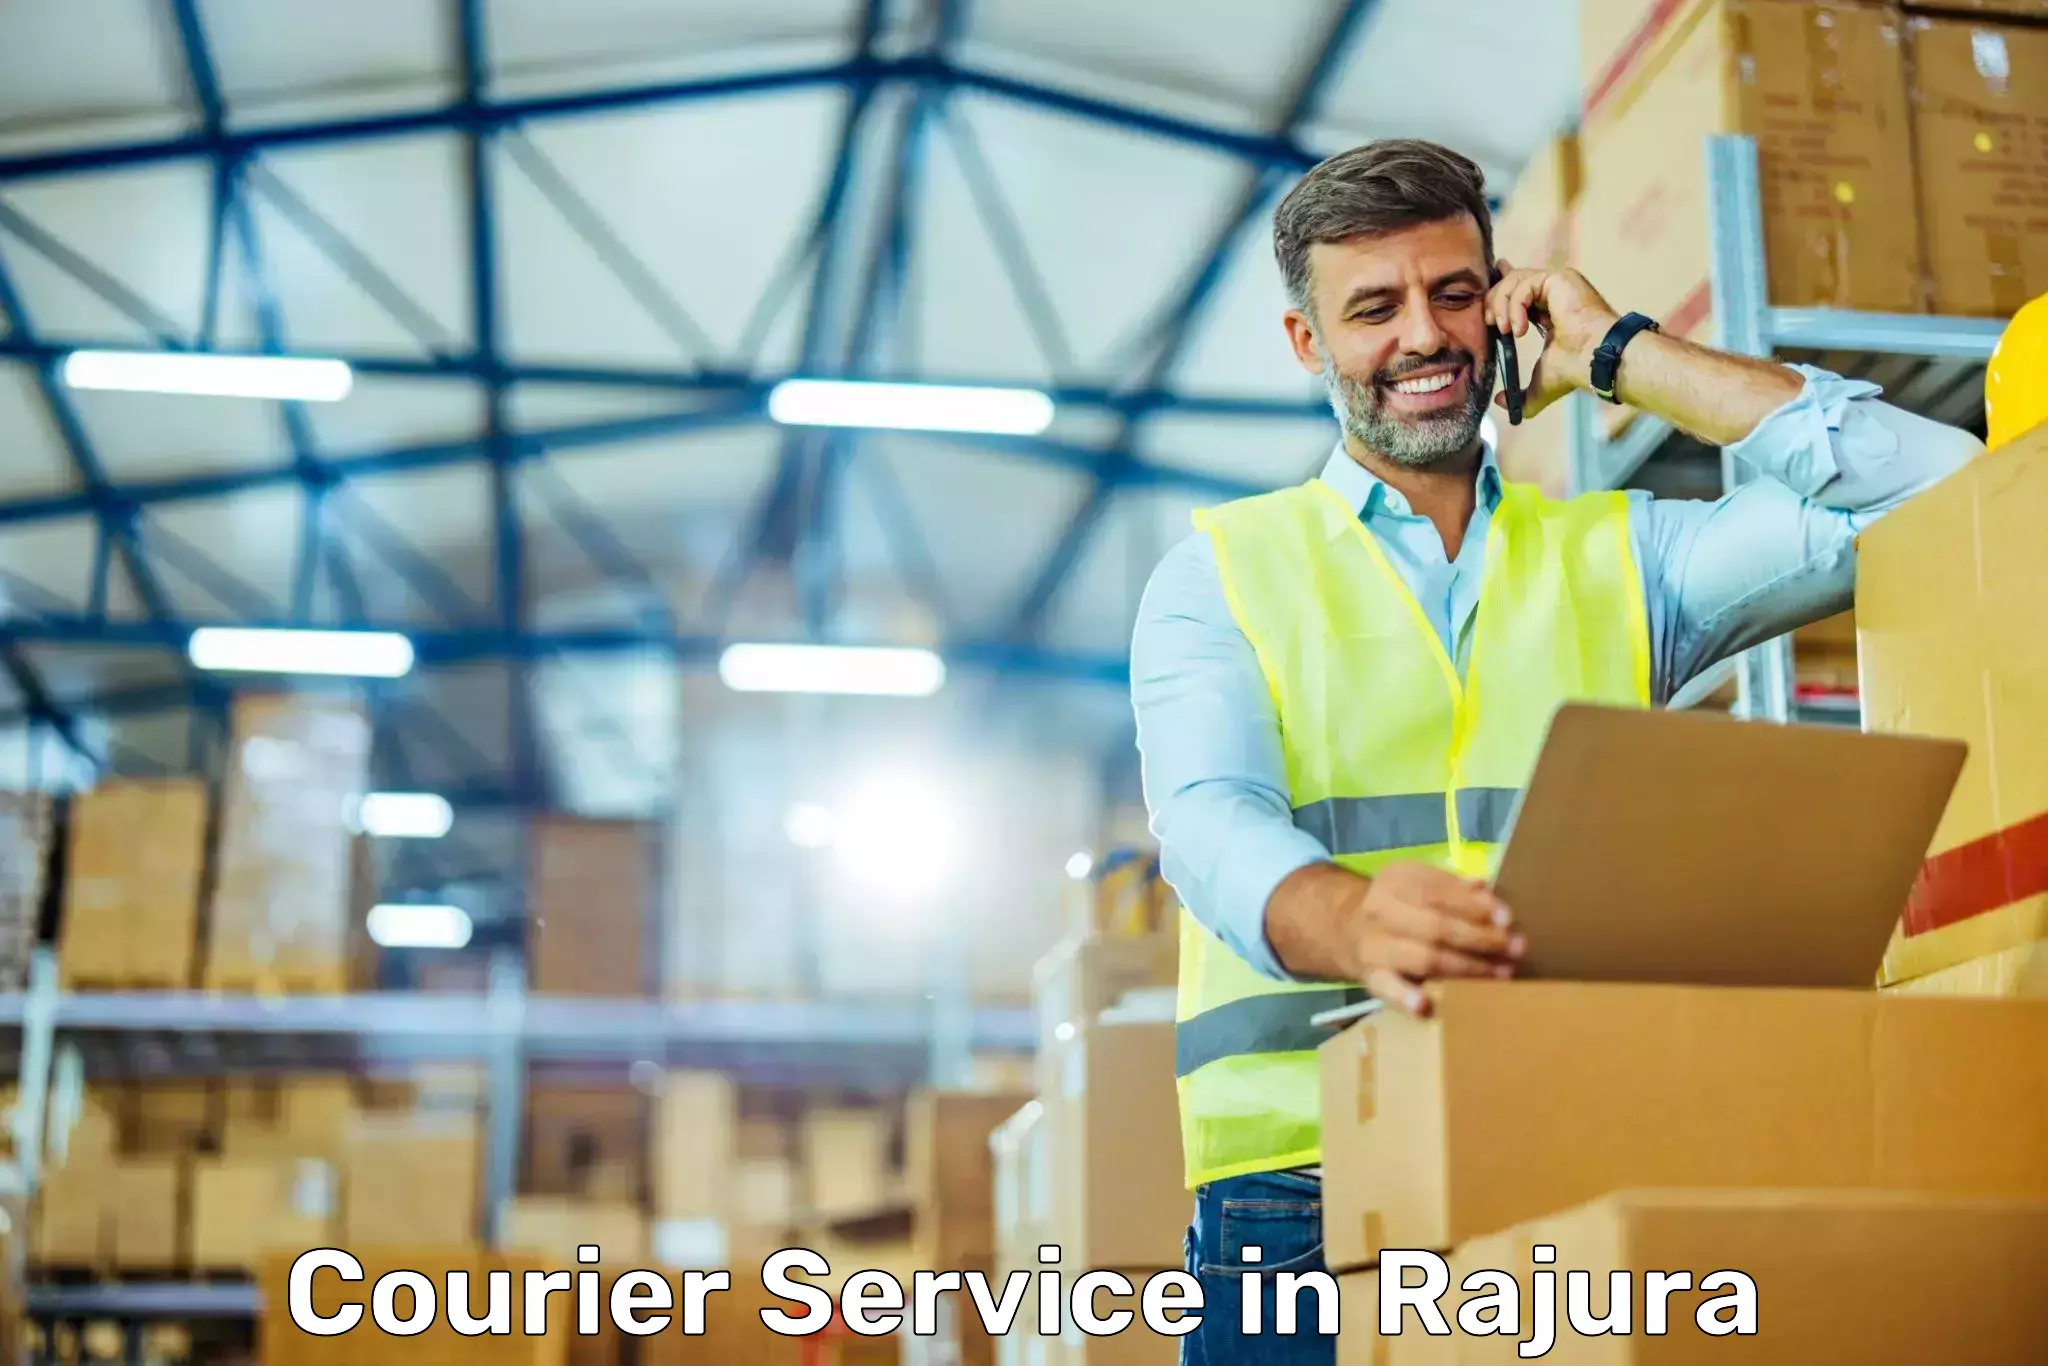 Comprehensive shipping services in Rajura